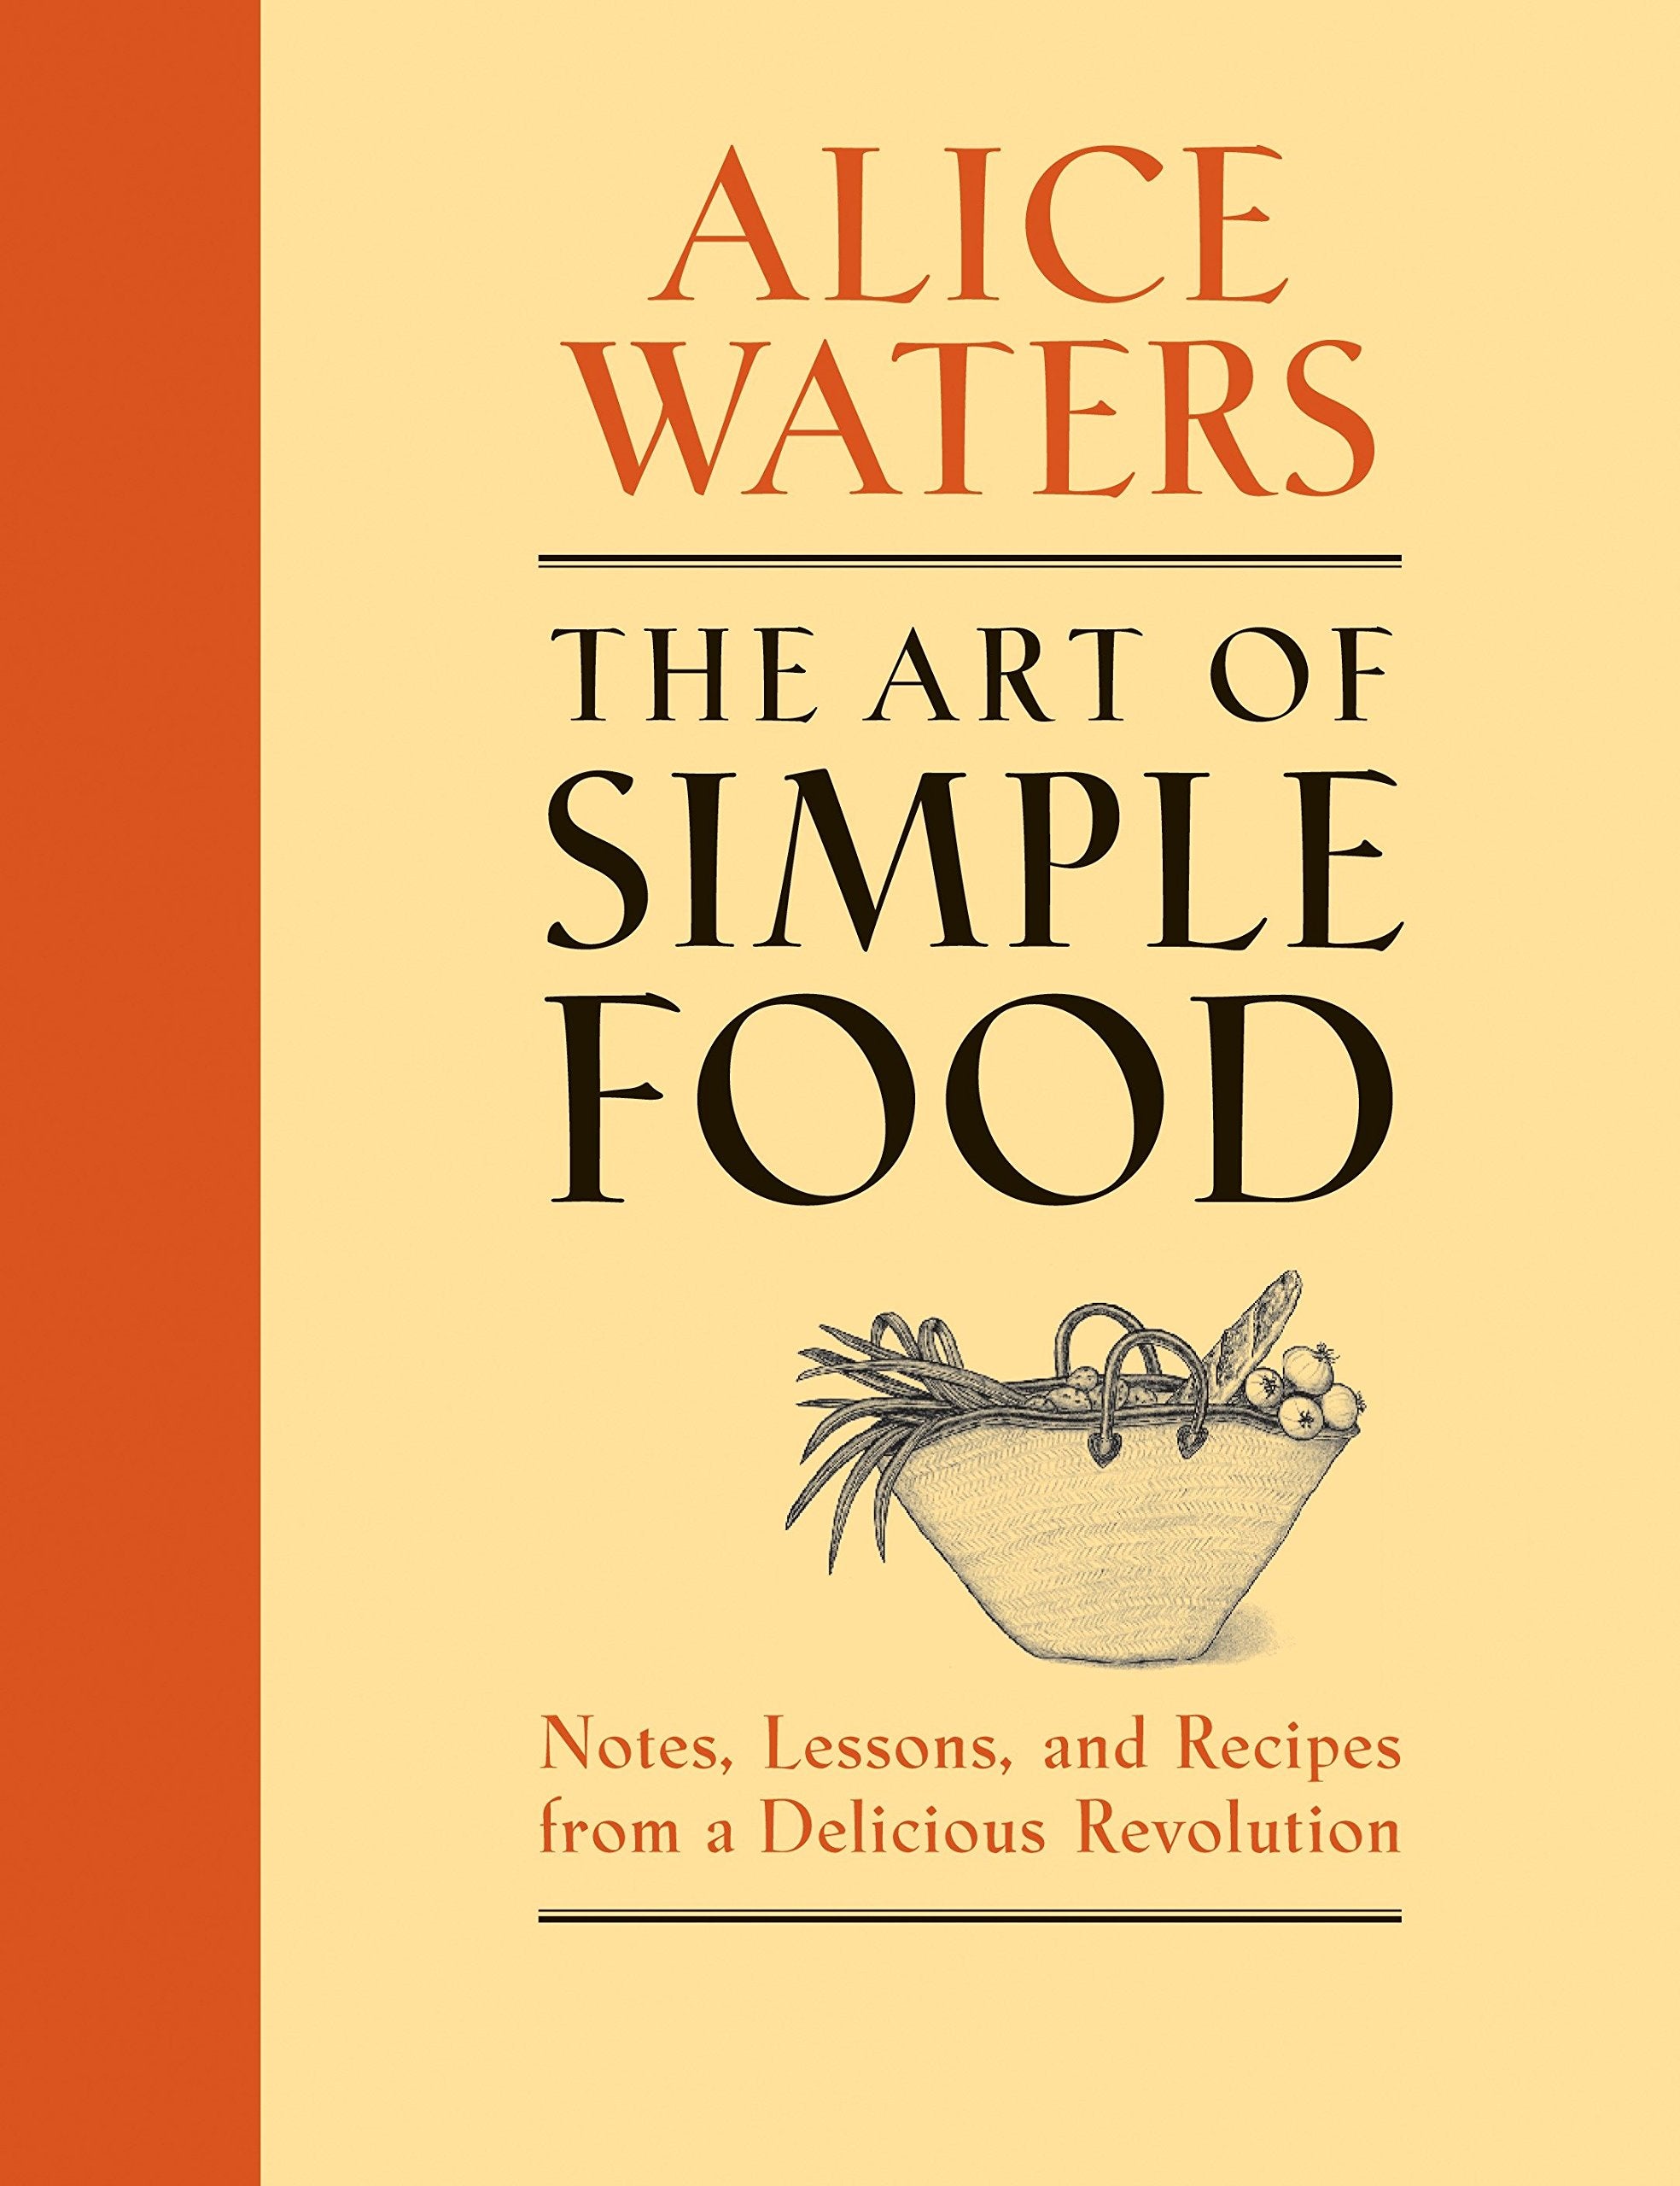 The Art of Simple Food: Notes, Lessons, and Recipes from a Delicious Revolution (Alice Waters) *Signed*